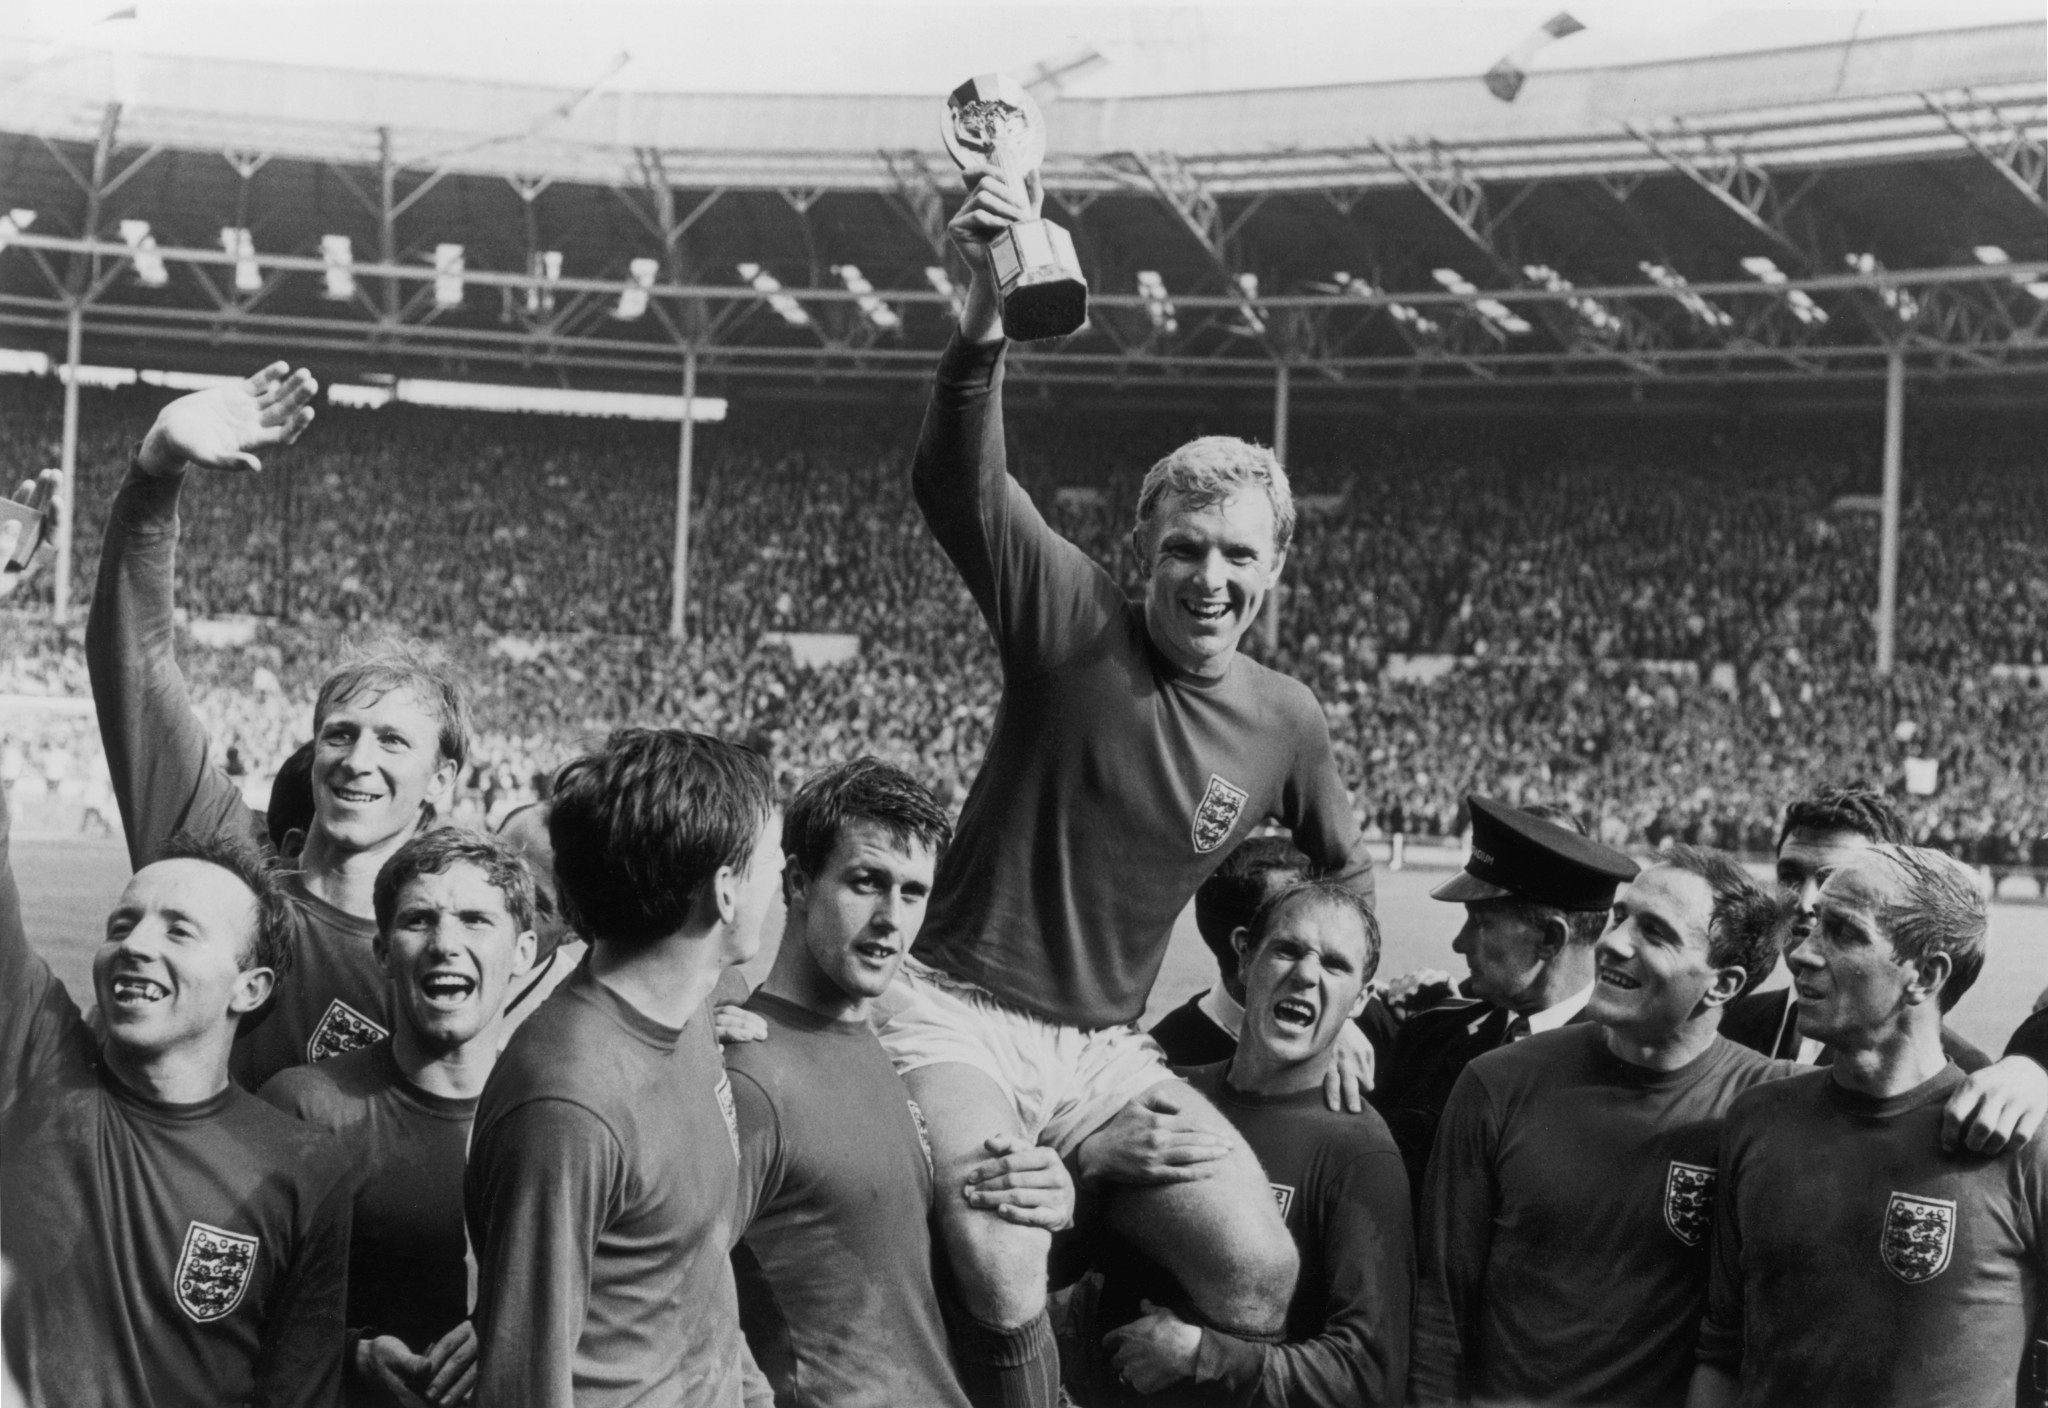 Bobby Moore hoisted the Jules Rimet trophy at Wembley Stadium after England won the 1966 World Cup ©Getty Images